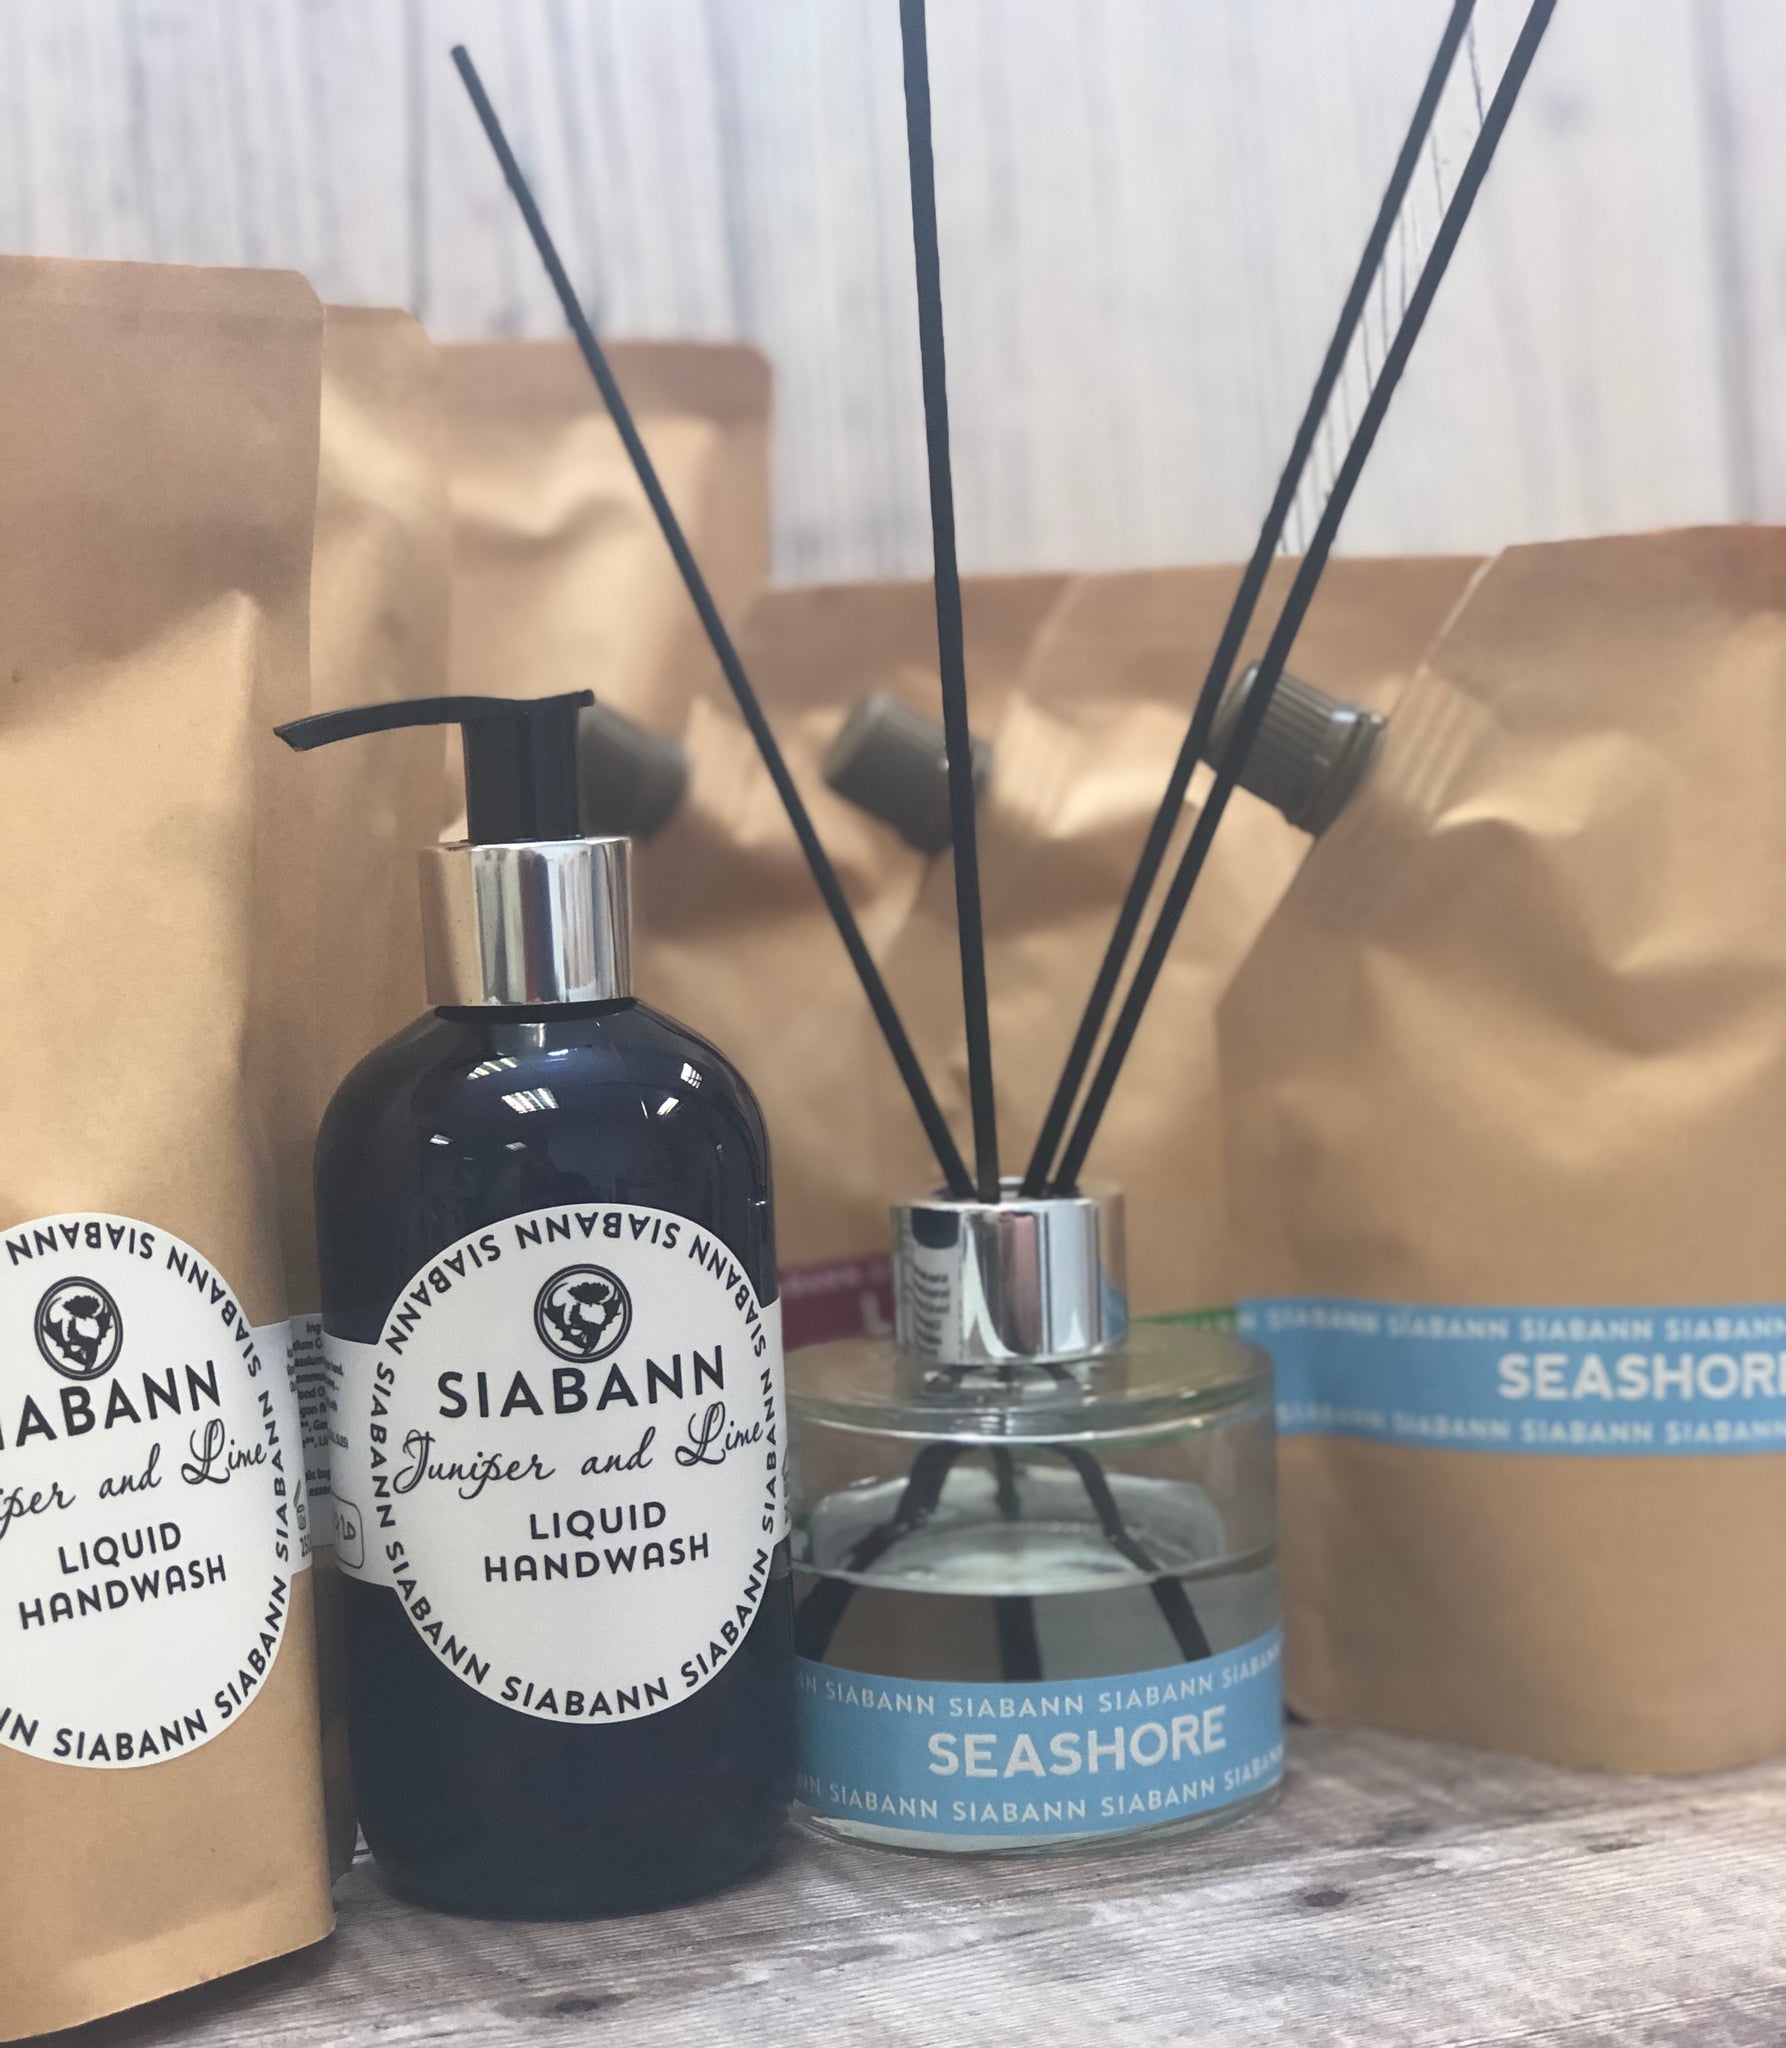 New Eco Siabann products for Autumn 2019